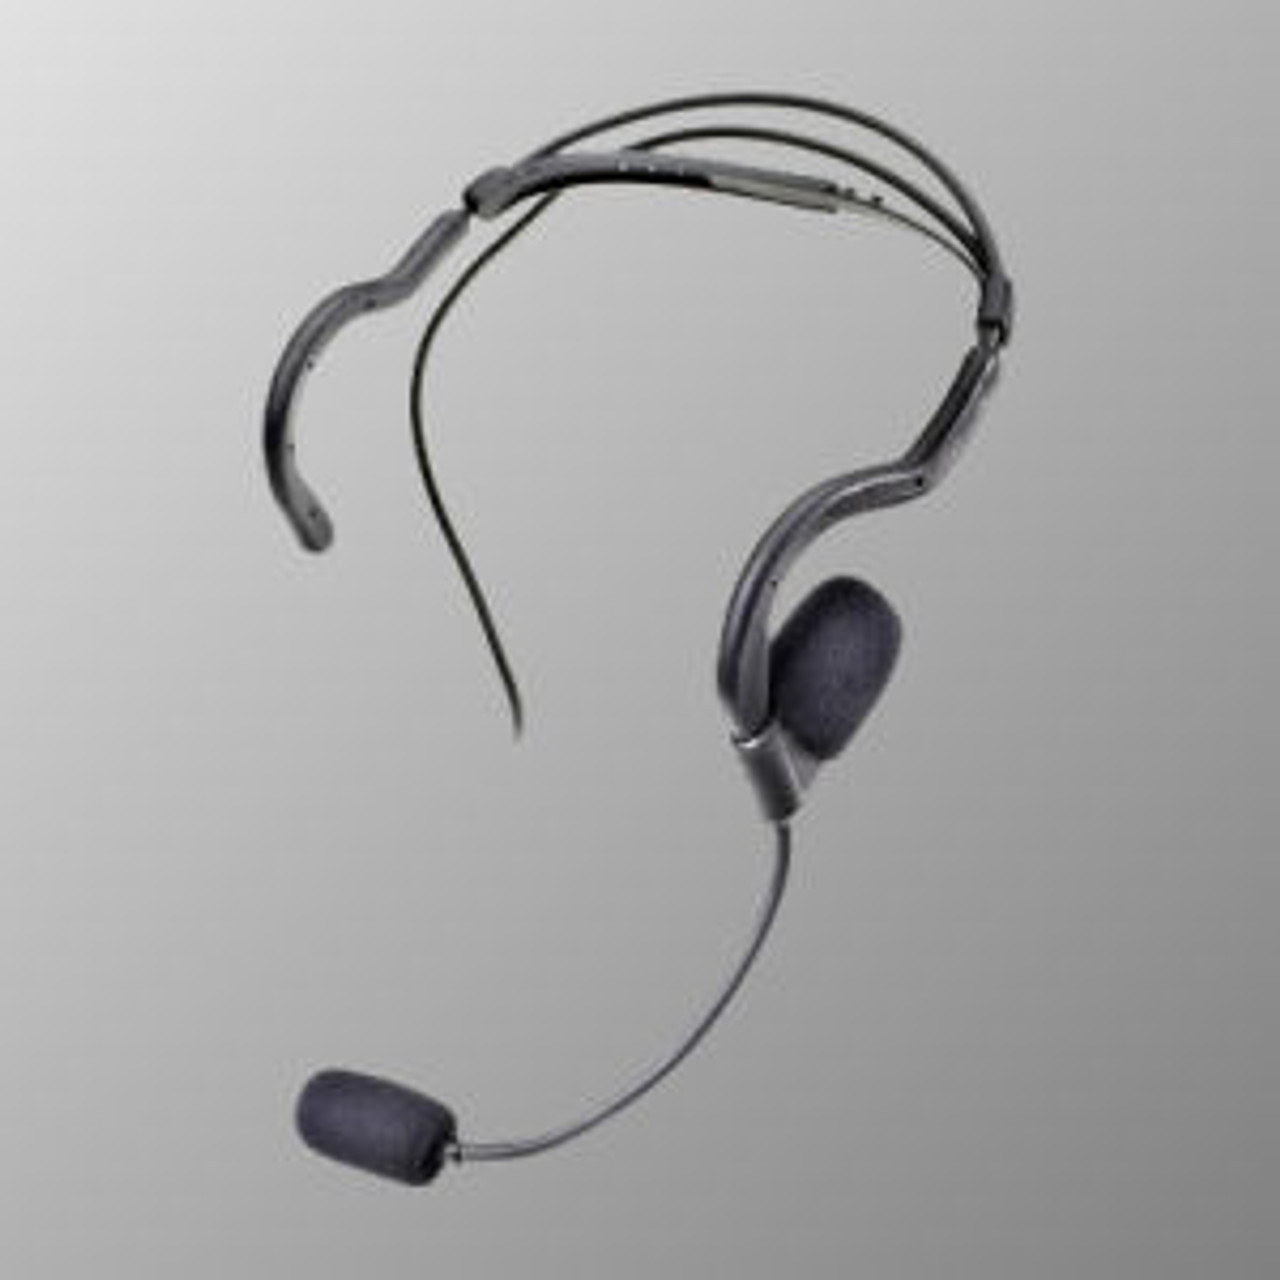 EF Johnson 51FIRE ES Tactical Noise Canceling Single Muff Headset